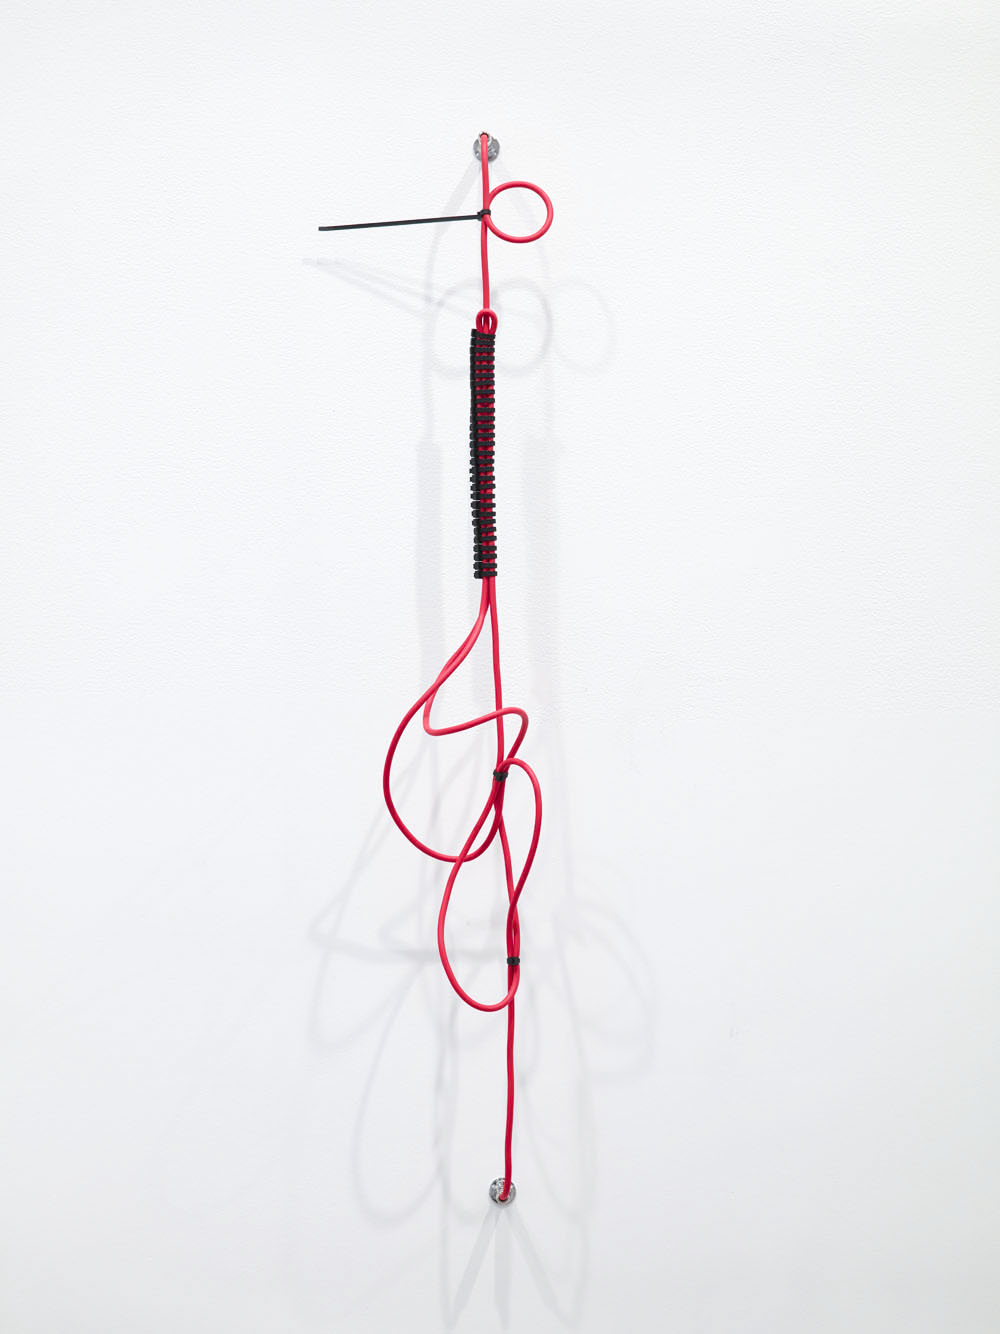  SHHH, The Red Series #3--Noise cancelling instrument cable, cable ties and endpin jacks 39 x 8 x 6.25 inches 2014 